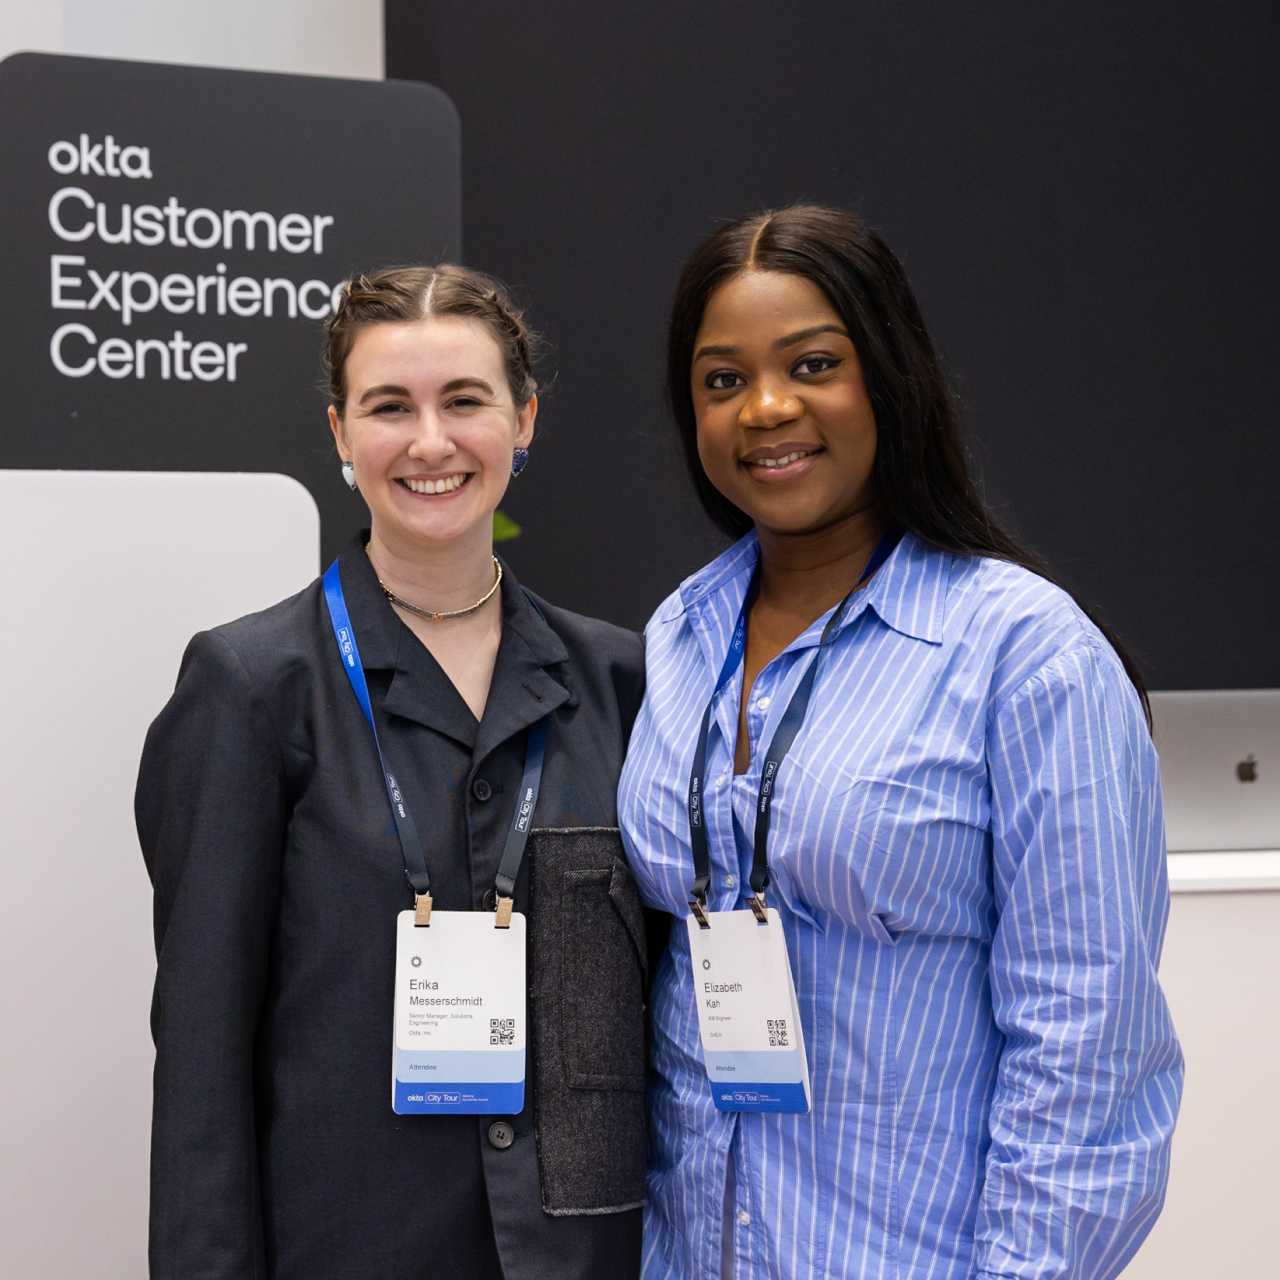 Two female employees posing next to Okta Customer Experience center sign